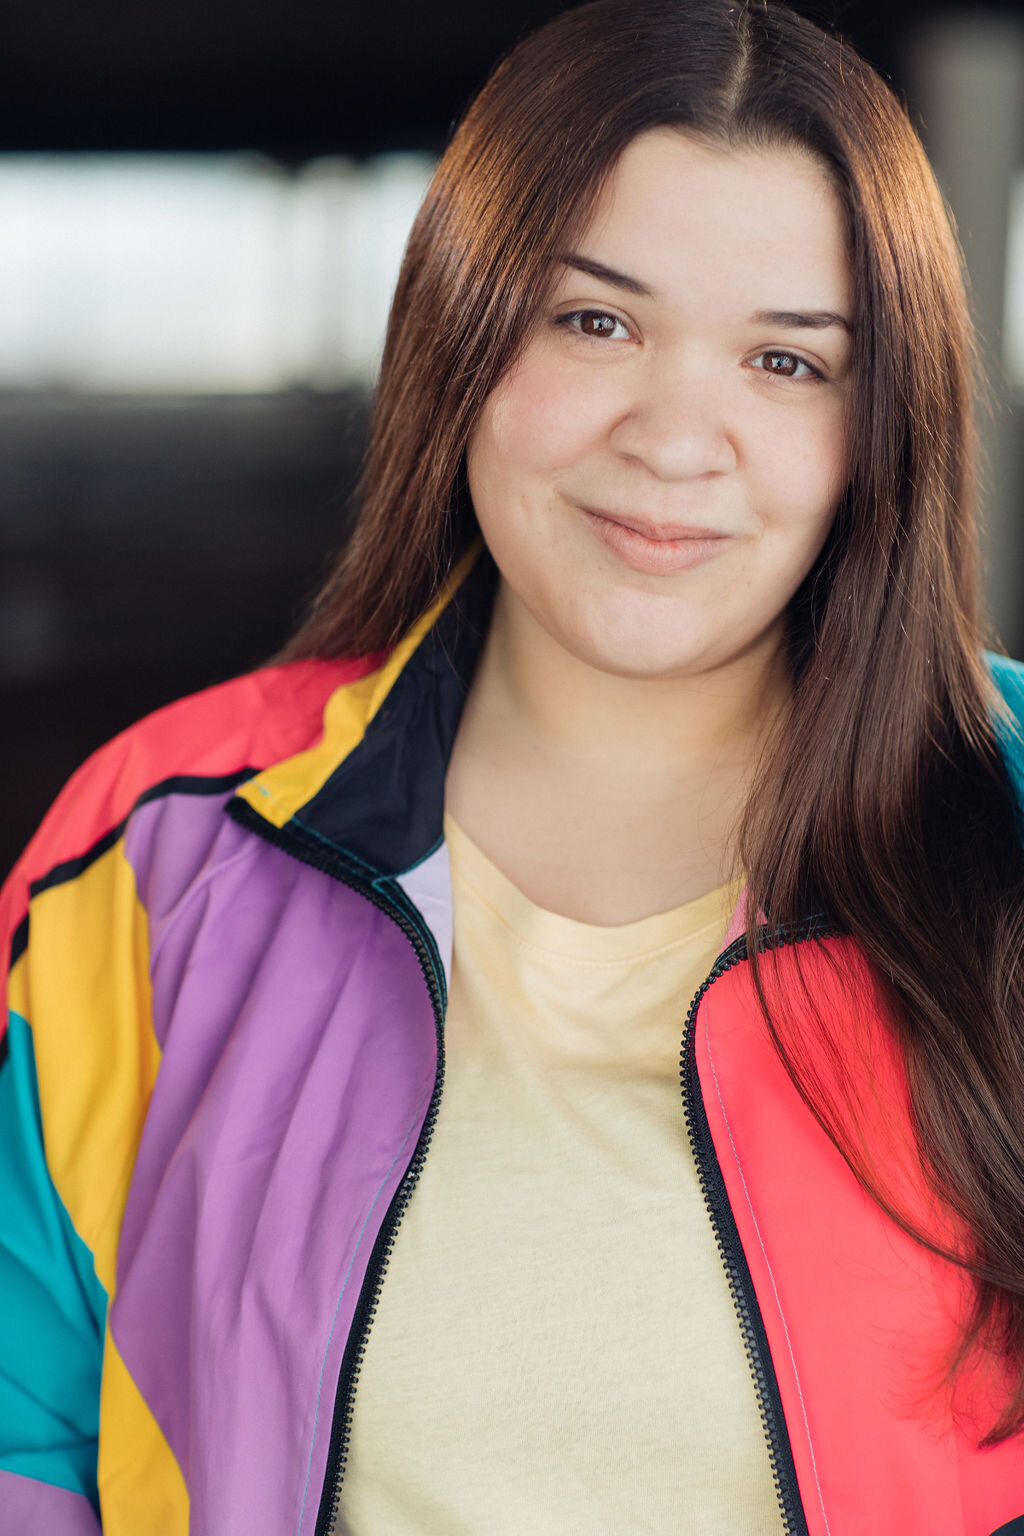 Headshot Photograph Of Young Woman In Colorful jacket And Inner Yellow Shirt Los Angeles